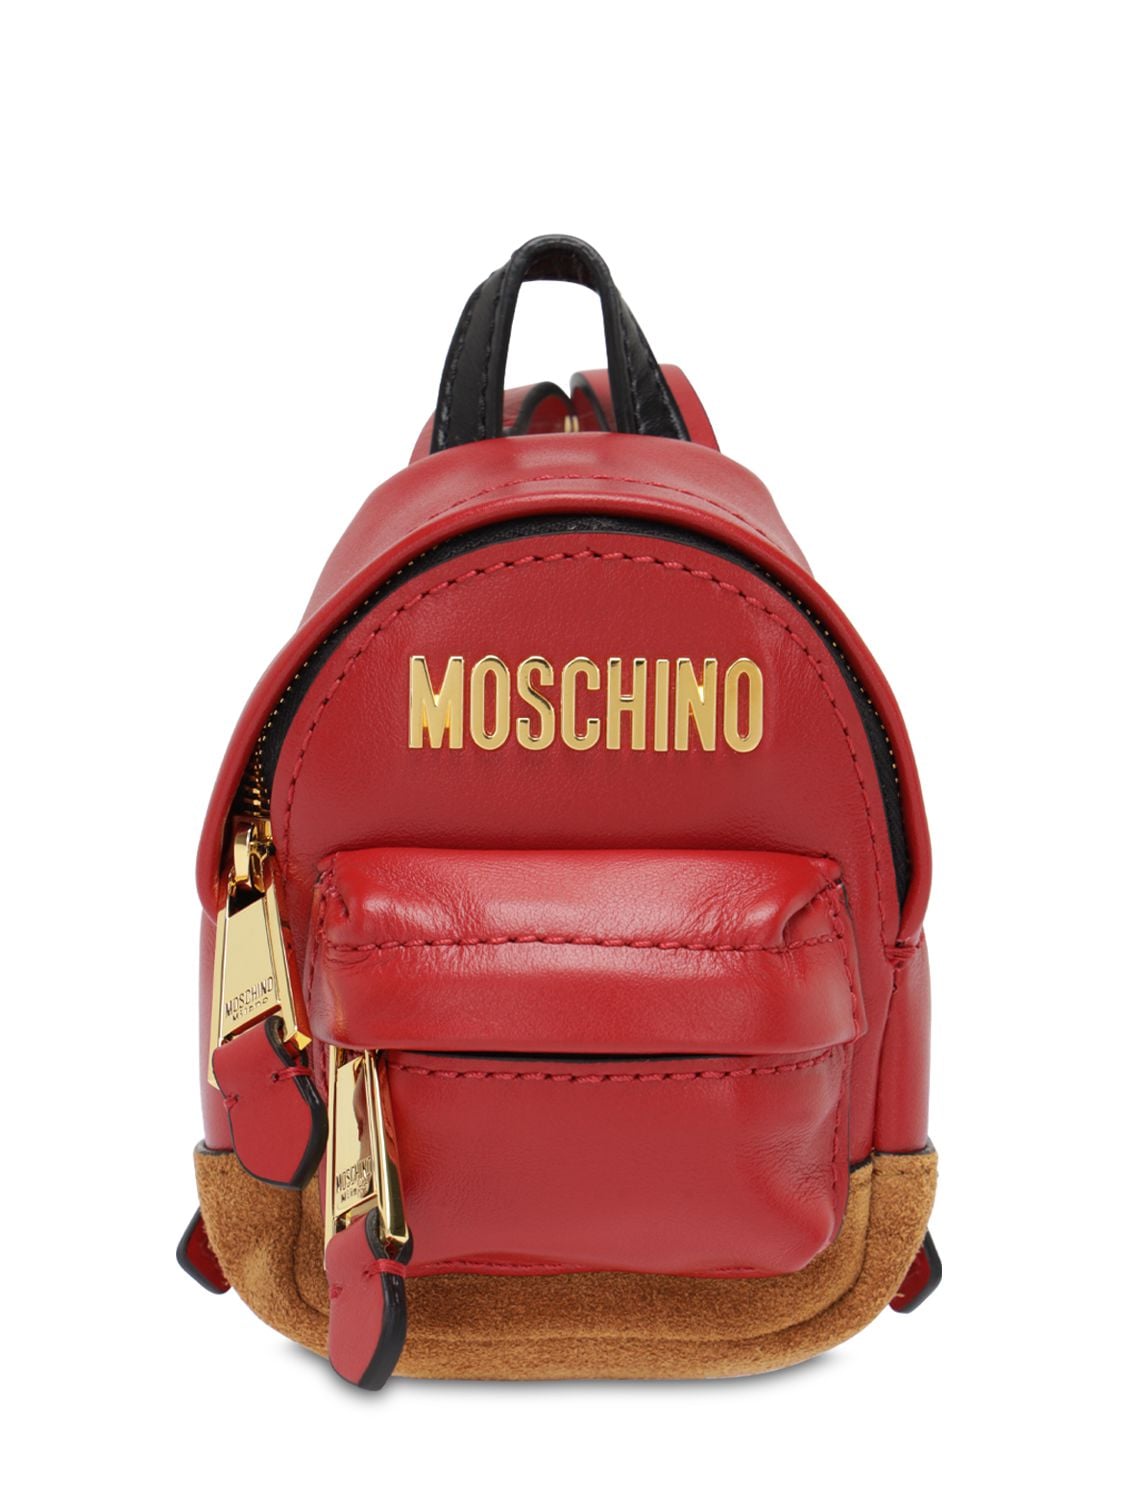 moschino leather backpack